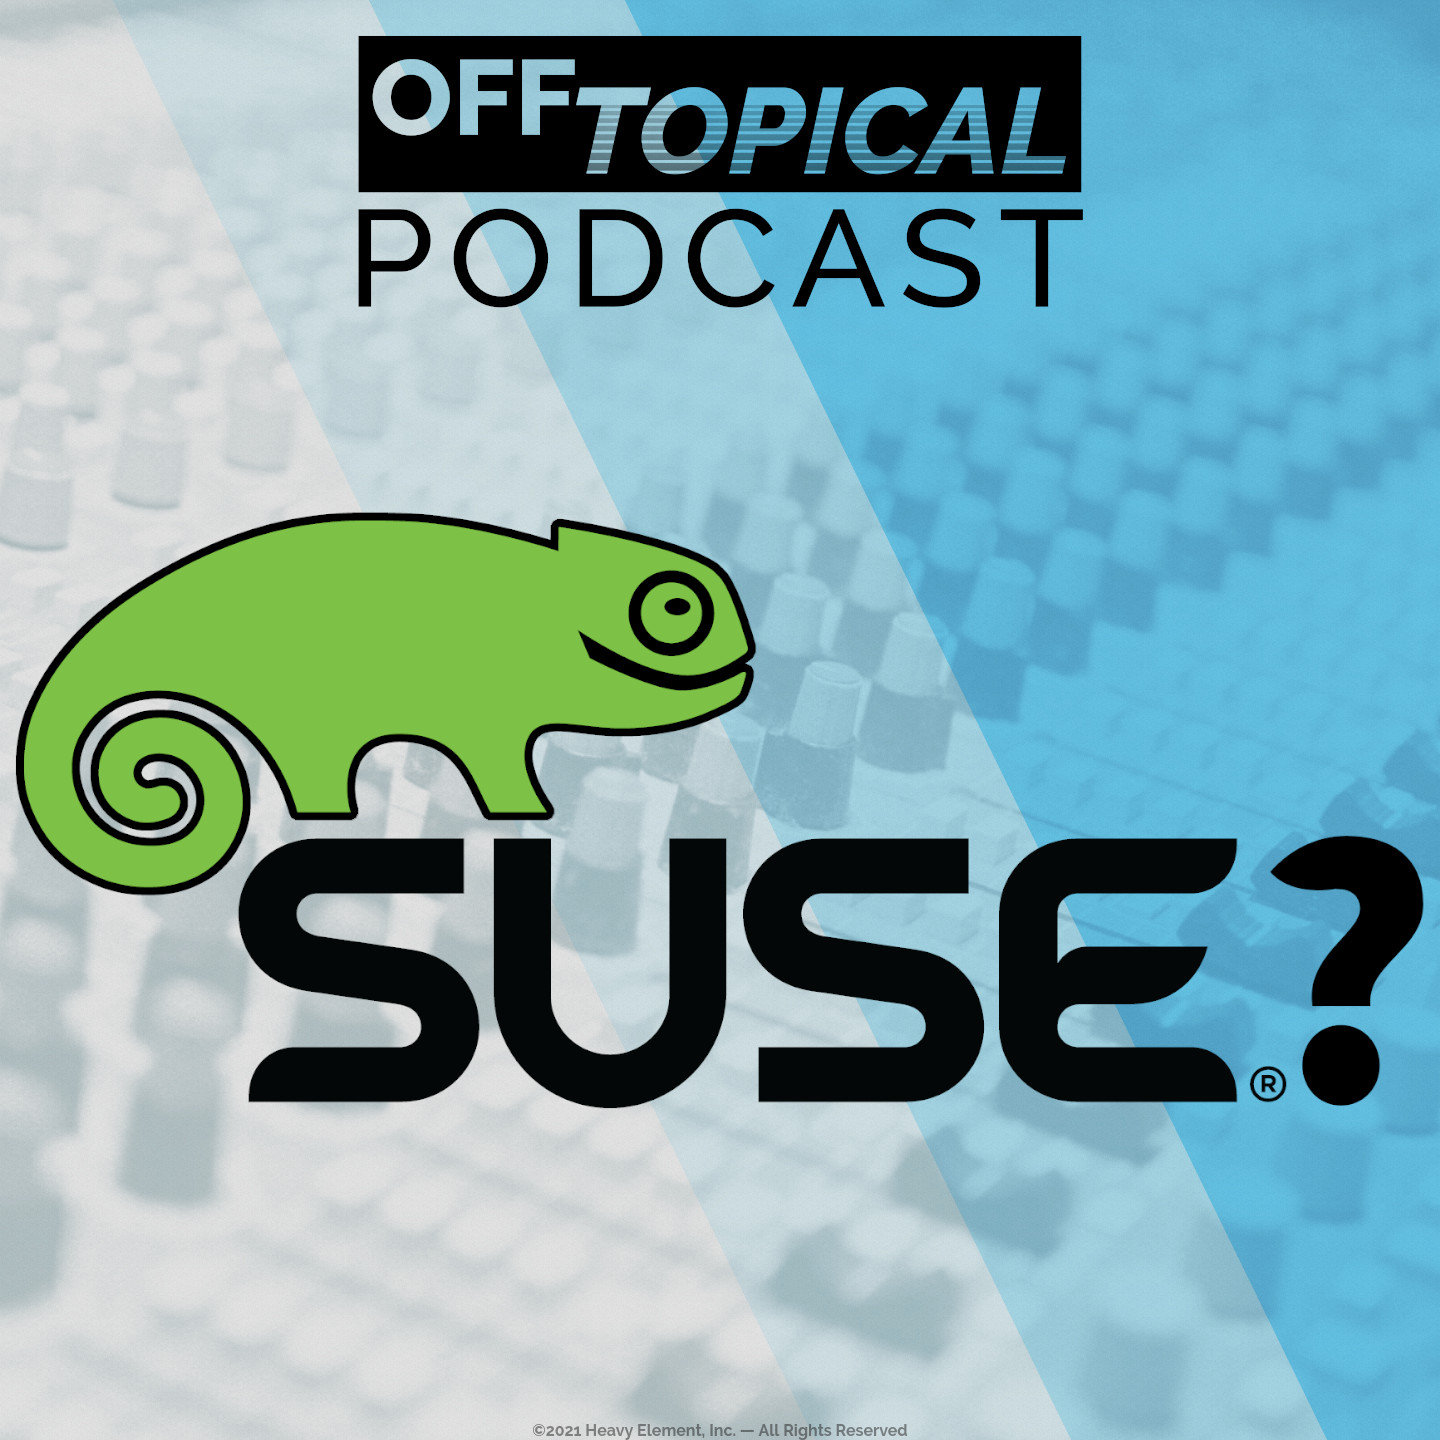 Who knew SUSE was so profitable?